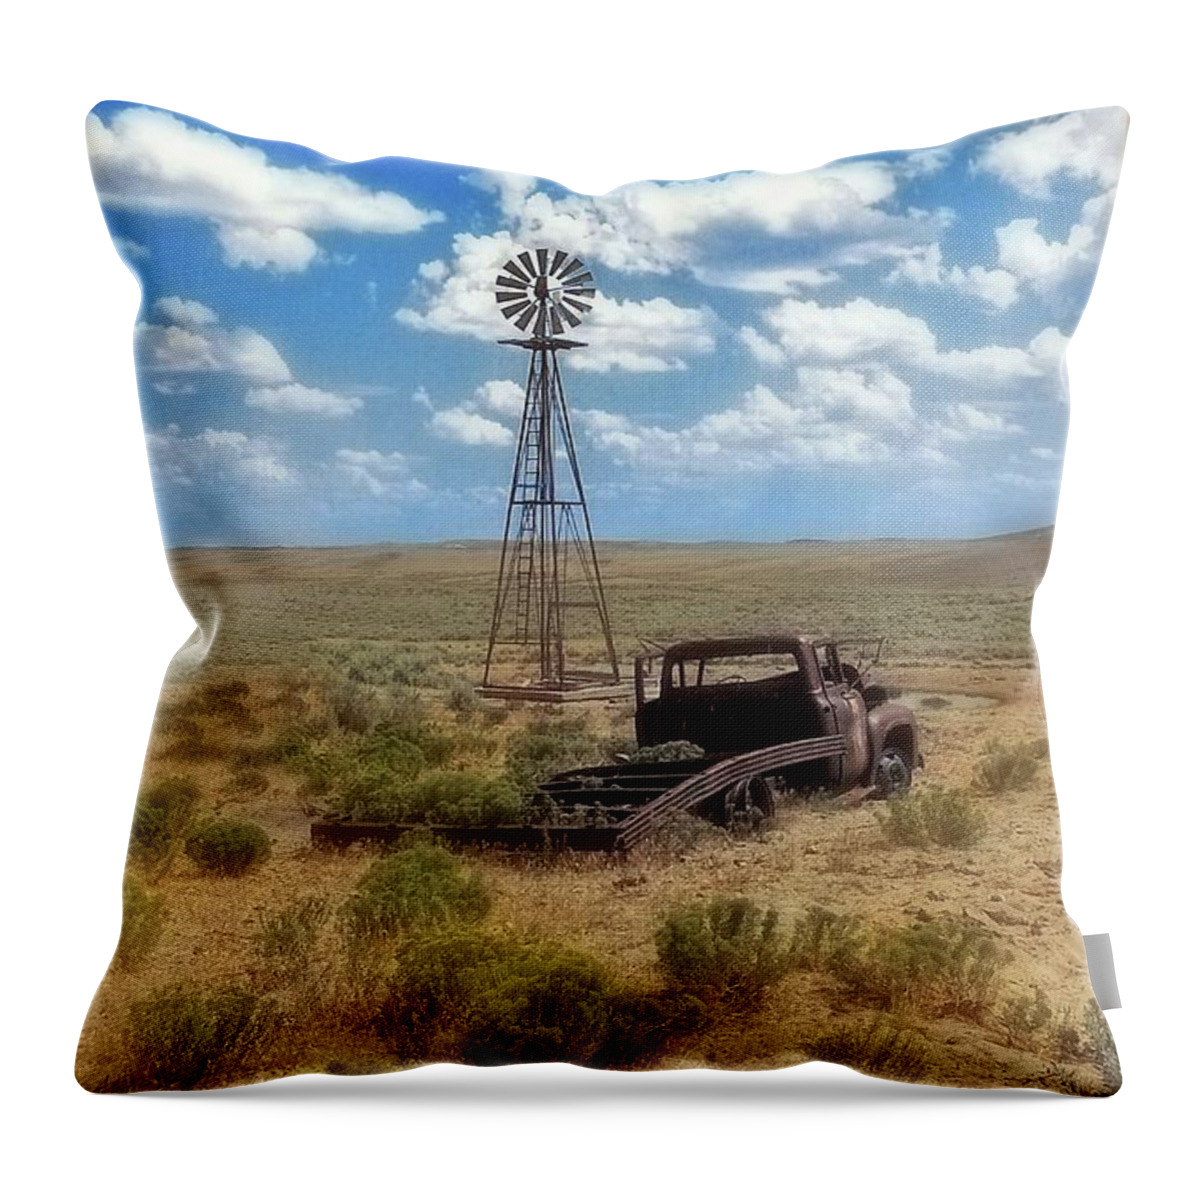 Windmill Throw Pillow featuring the photograph Windmill Over Lenzen by Amanda Smith